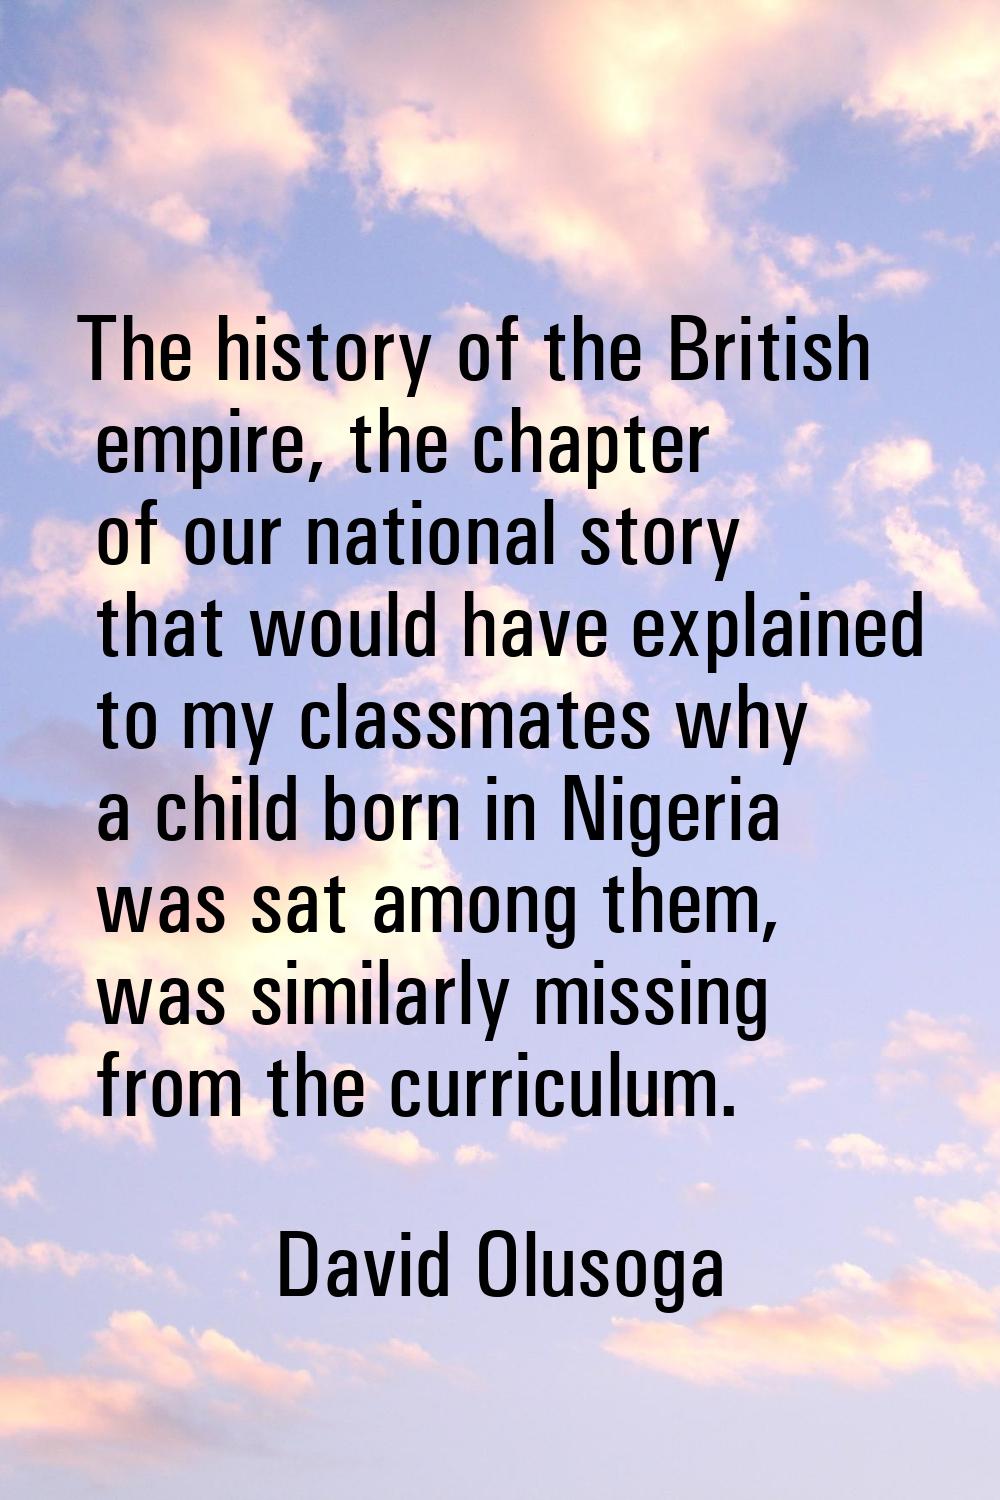 The history of the British empire, the chapter of our national story that would have explained to m